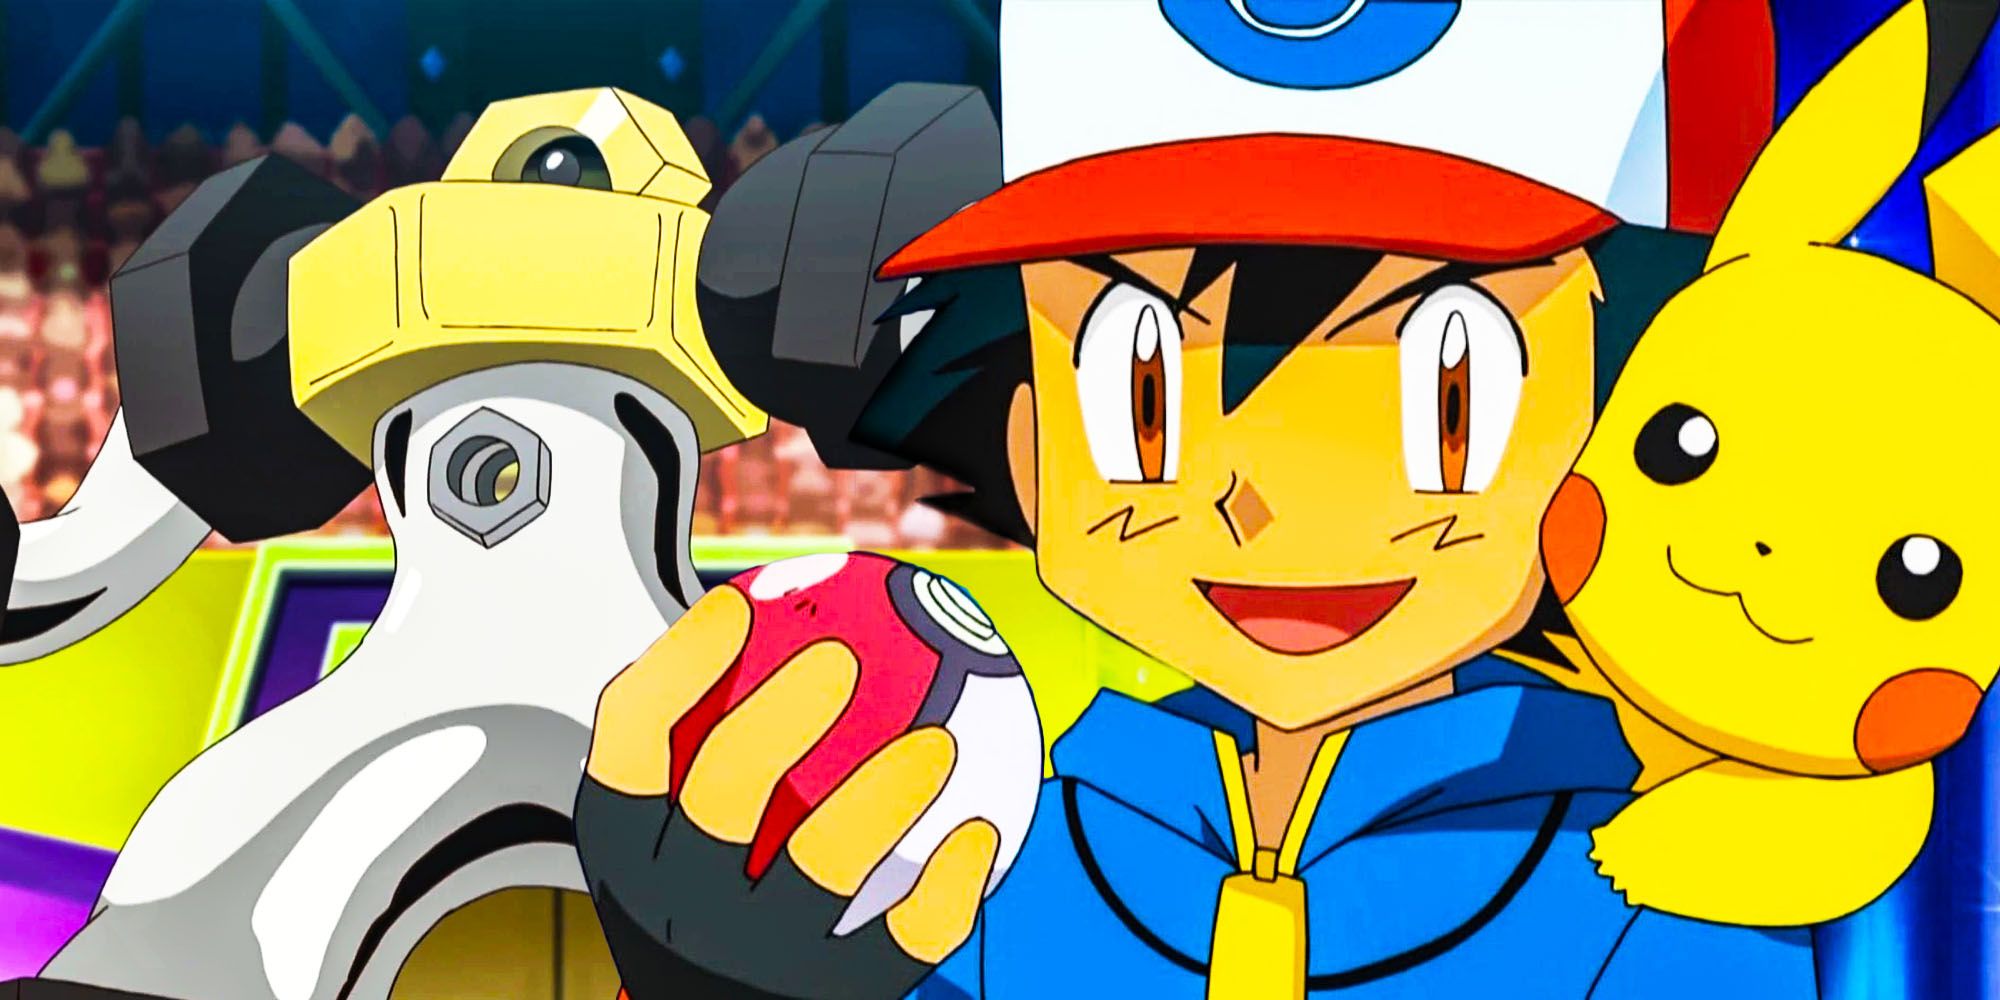 Does Ash catch any legendary or mythical Pokemon? - Quora